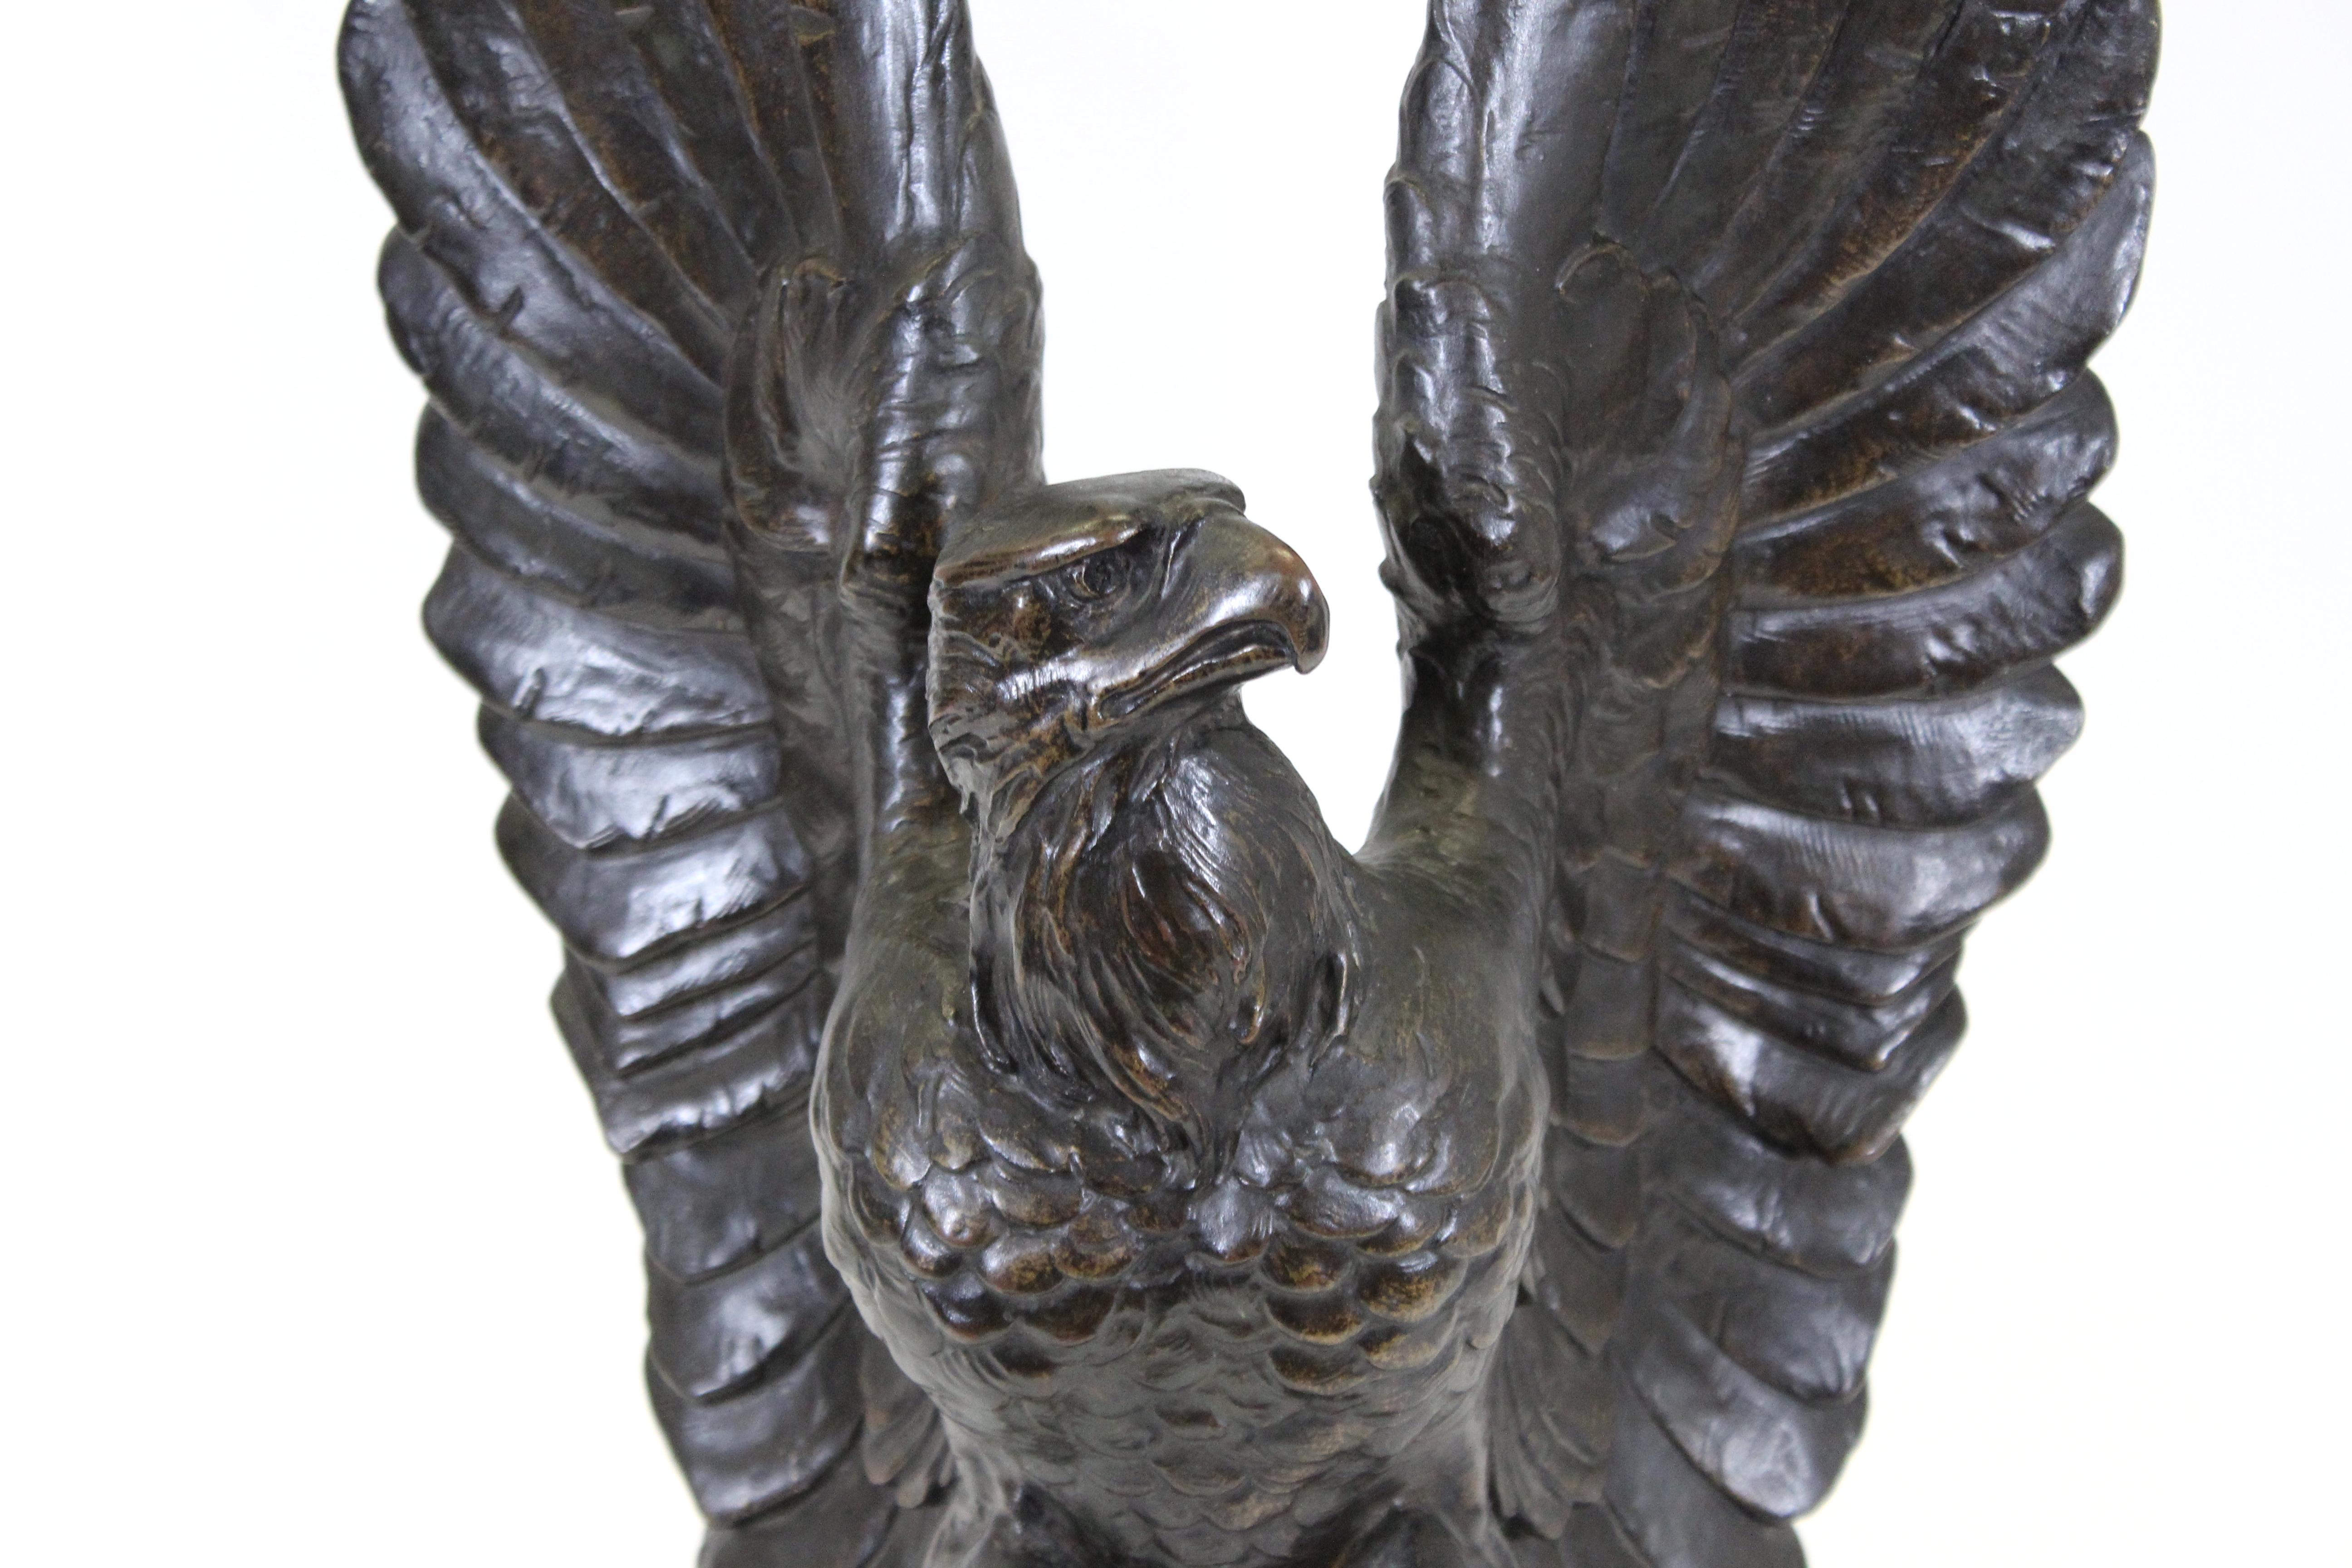 Belle Époque Animalier cast heavy bronze sculpture of an eagle with raised spread wings, mounted on a narrow stepped ebonized base. The piece was made by a German-American sculptor likely during the late 19th-early 20th century and is in remarkable